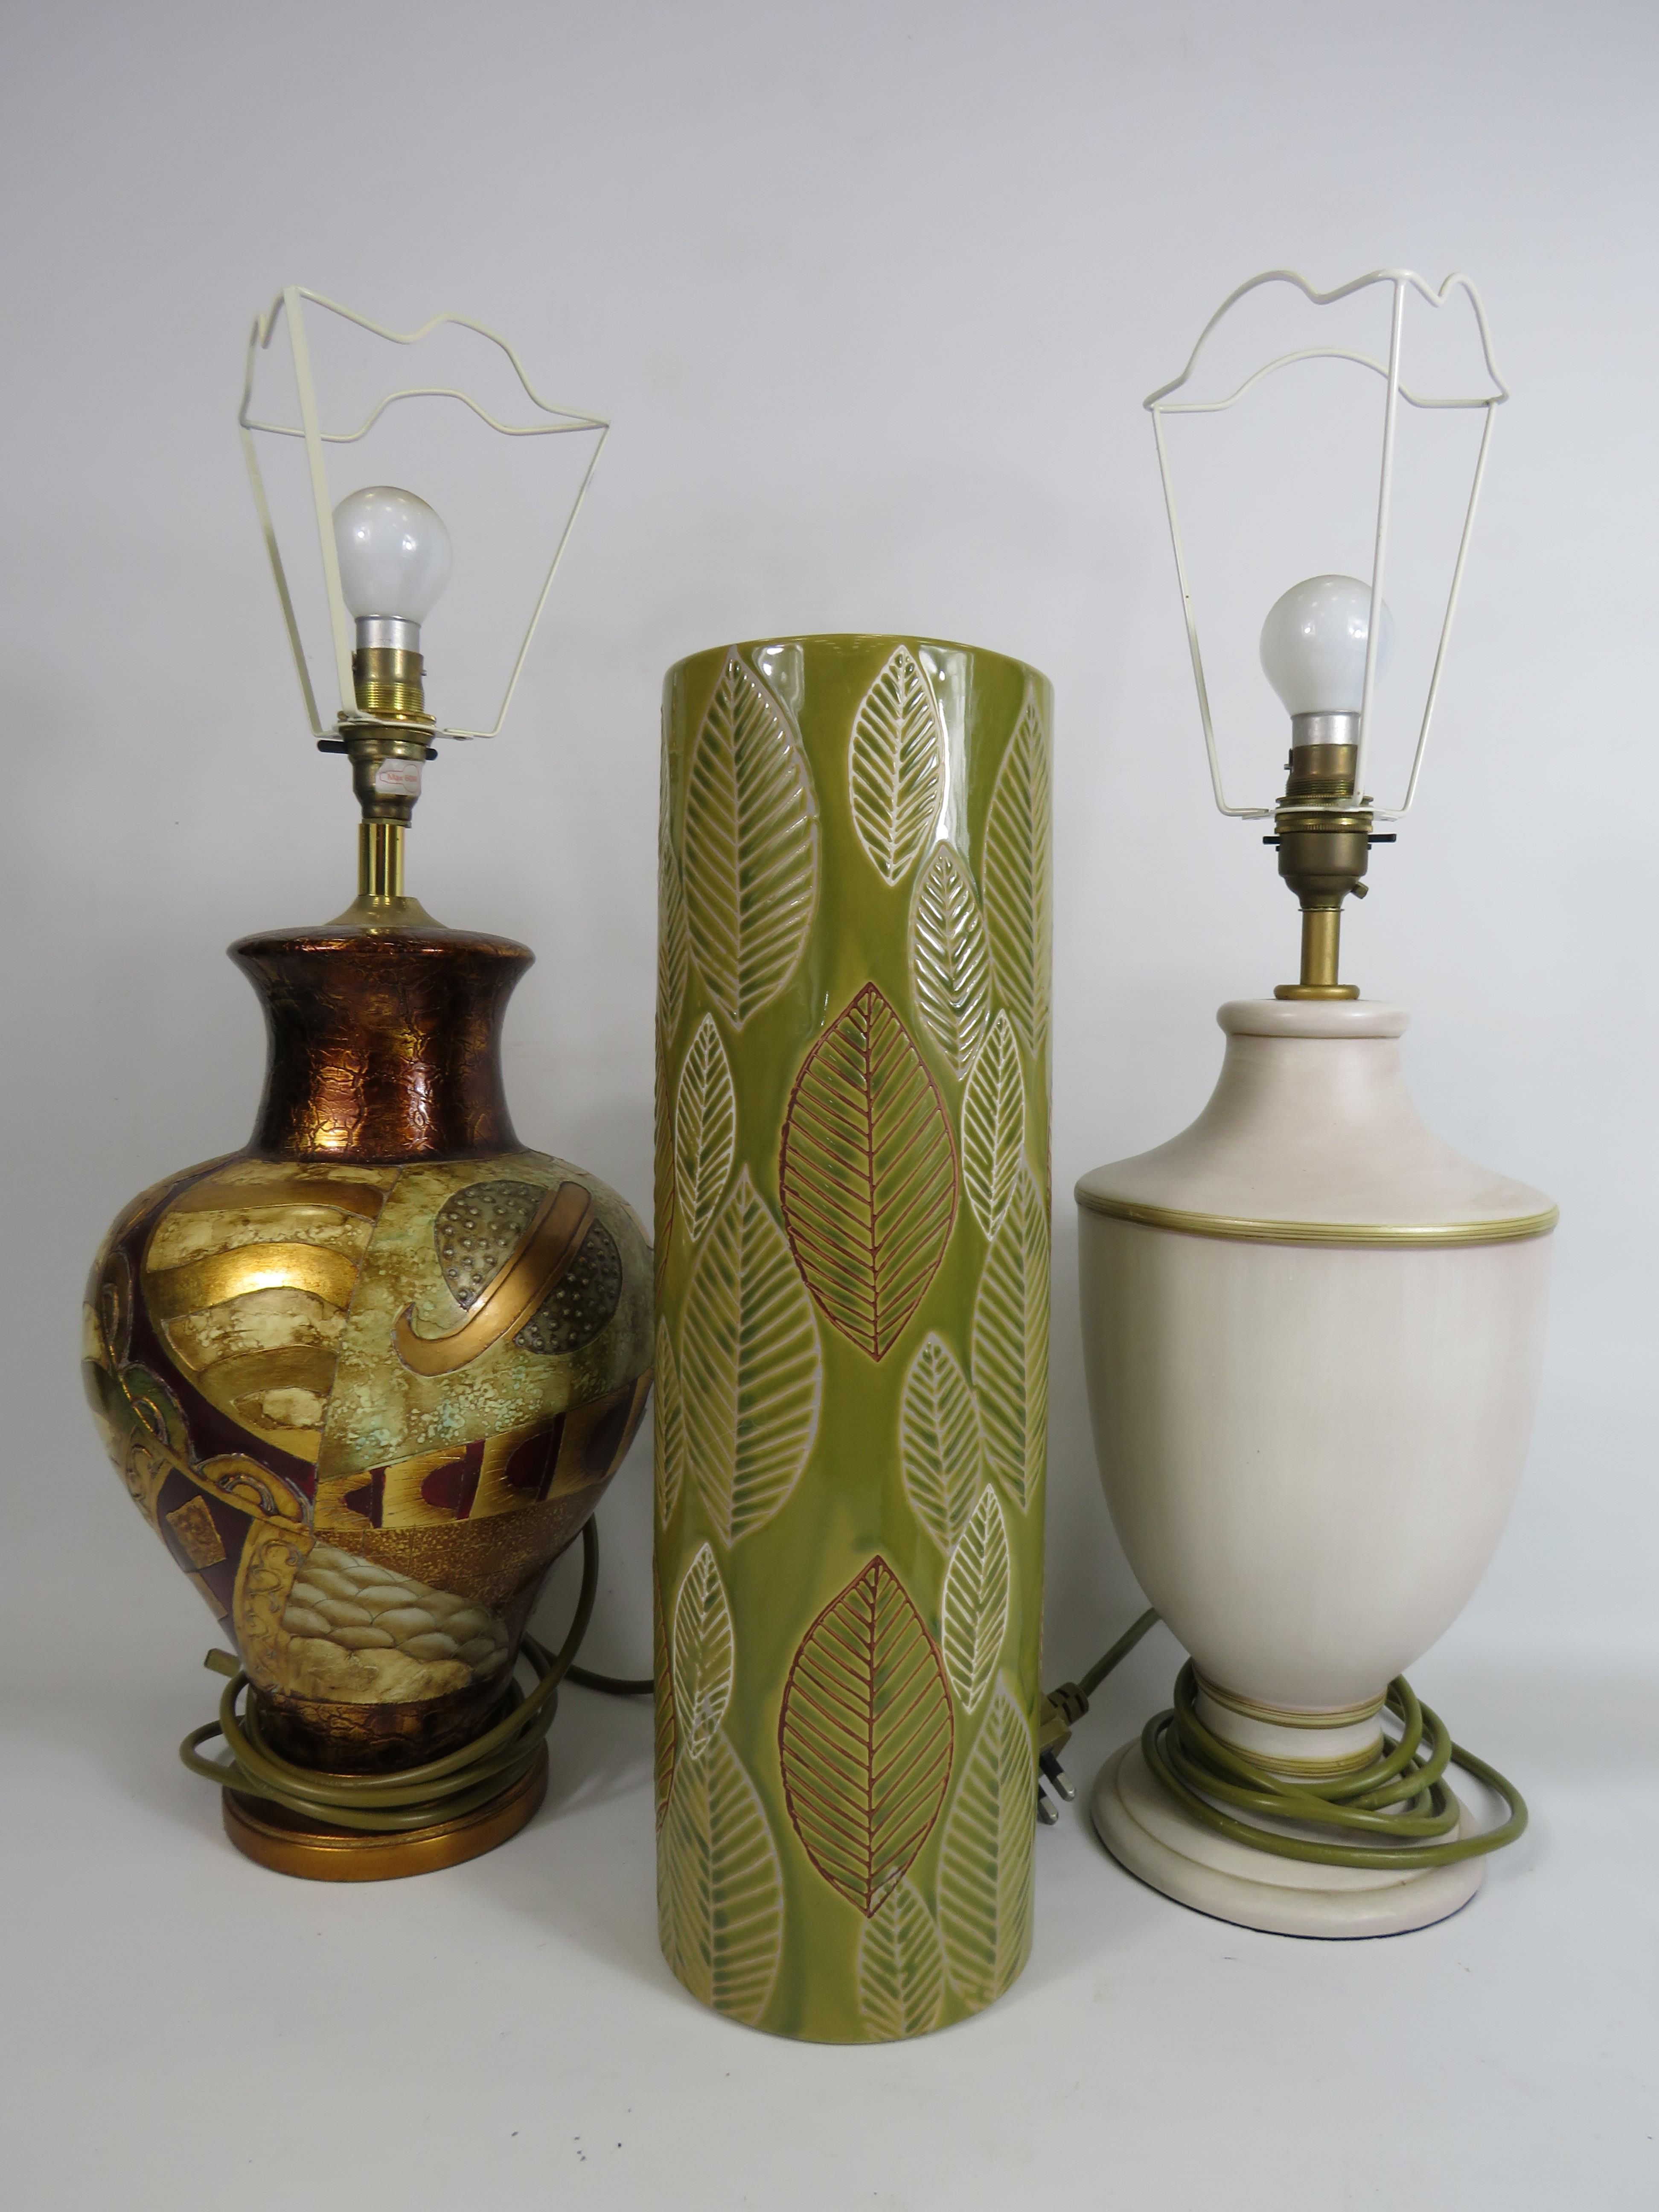 Two modern table lamps with shades and a floor vase.